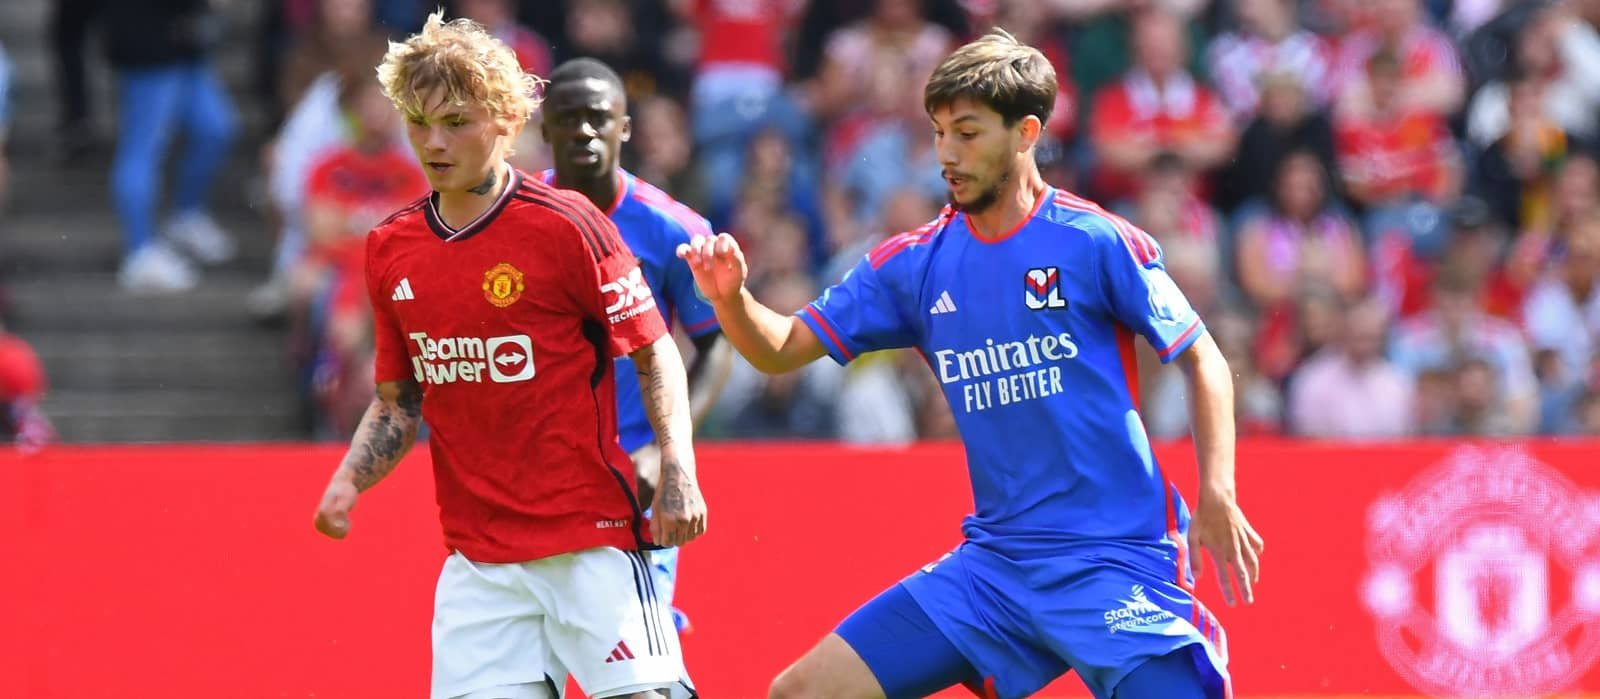 Isak Hansen-Aarøen’s personal trainer recommends him to leave Manchester United in search of gametime – Man United News And Transfer News